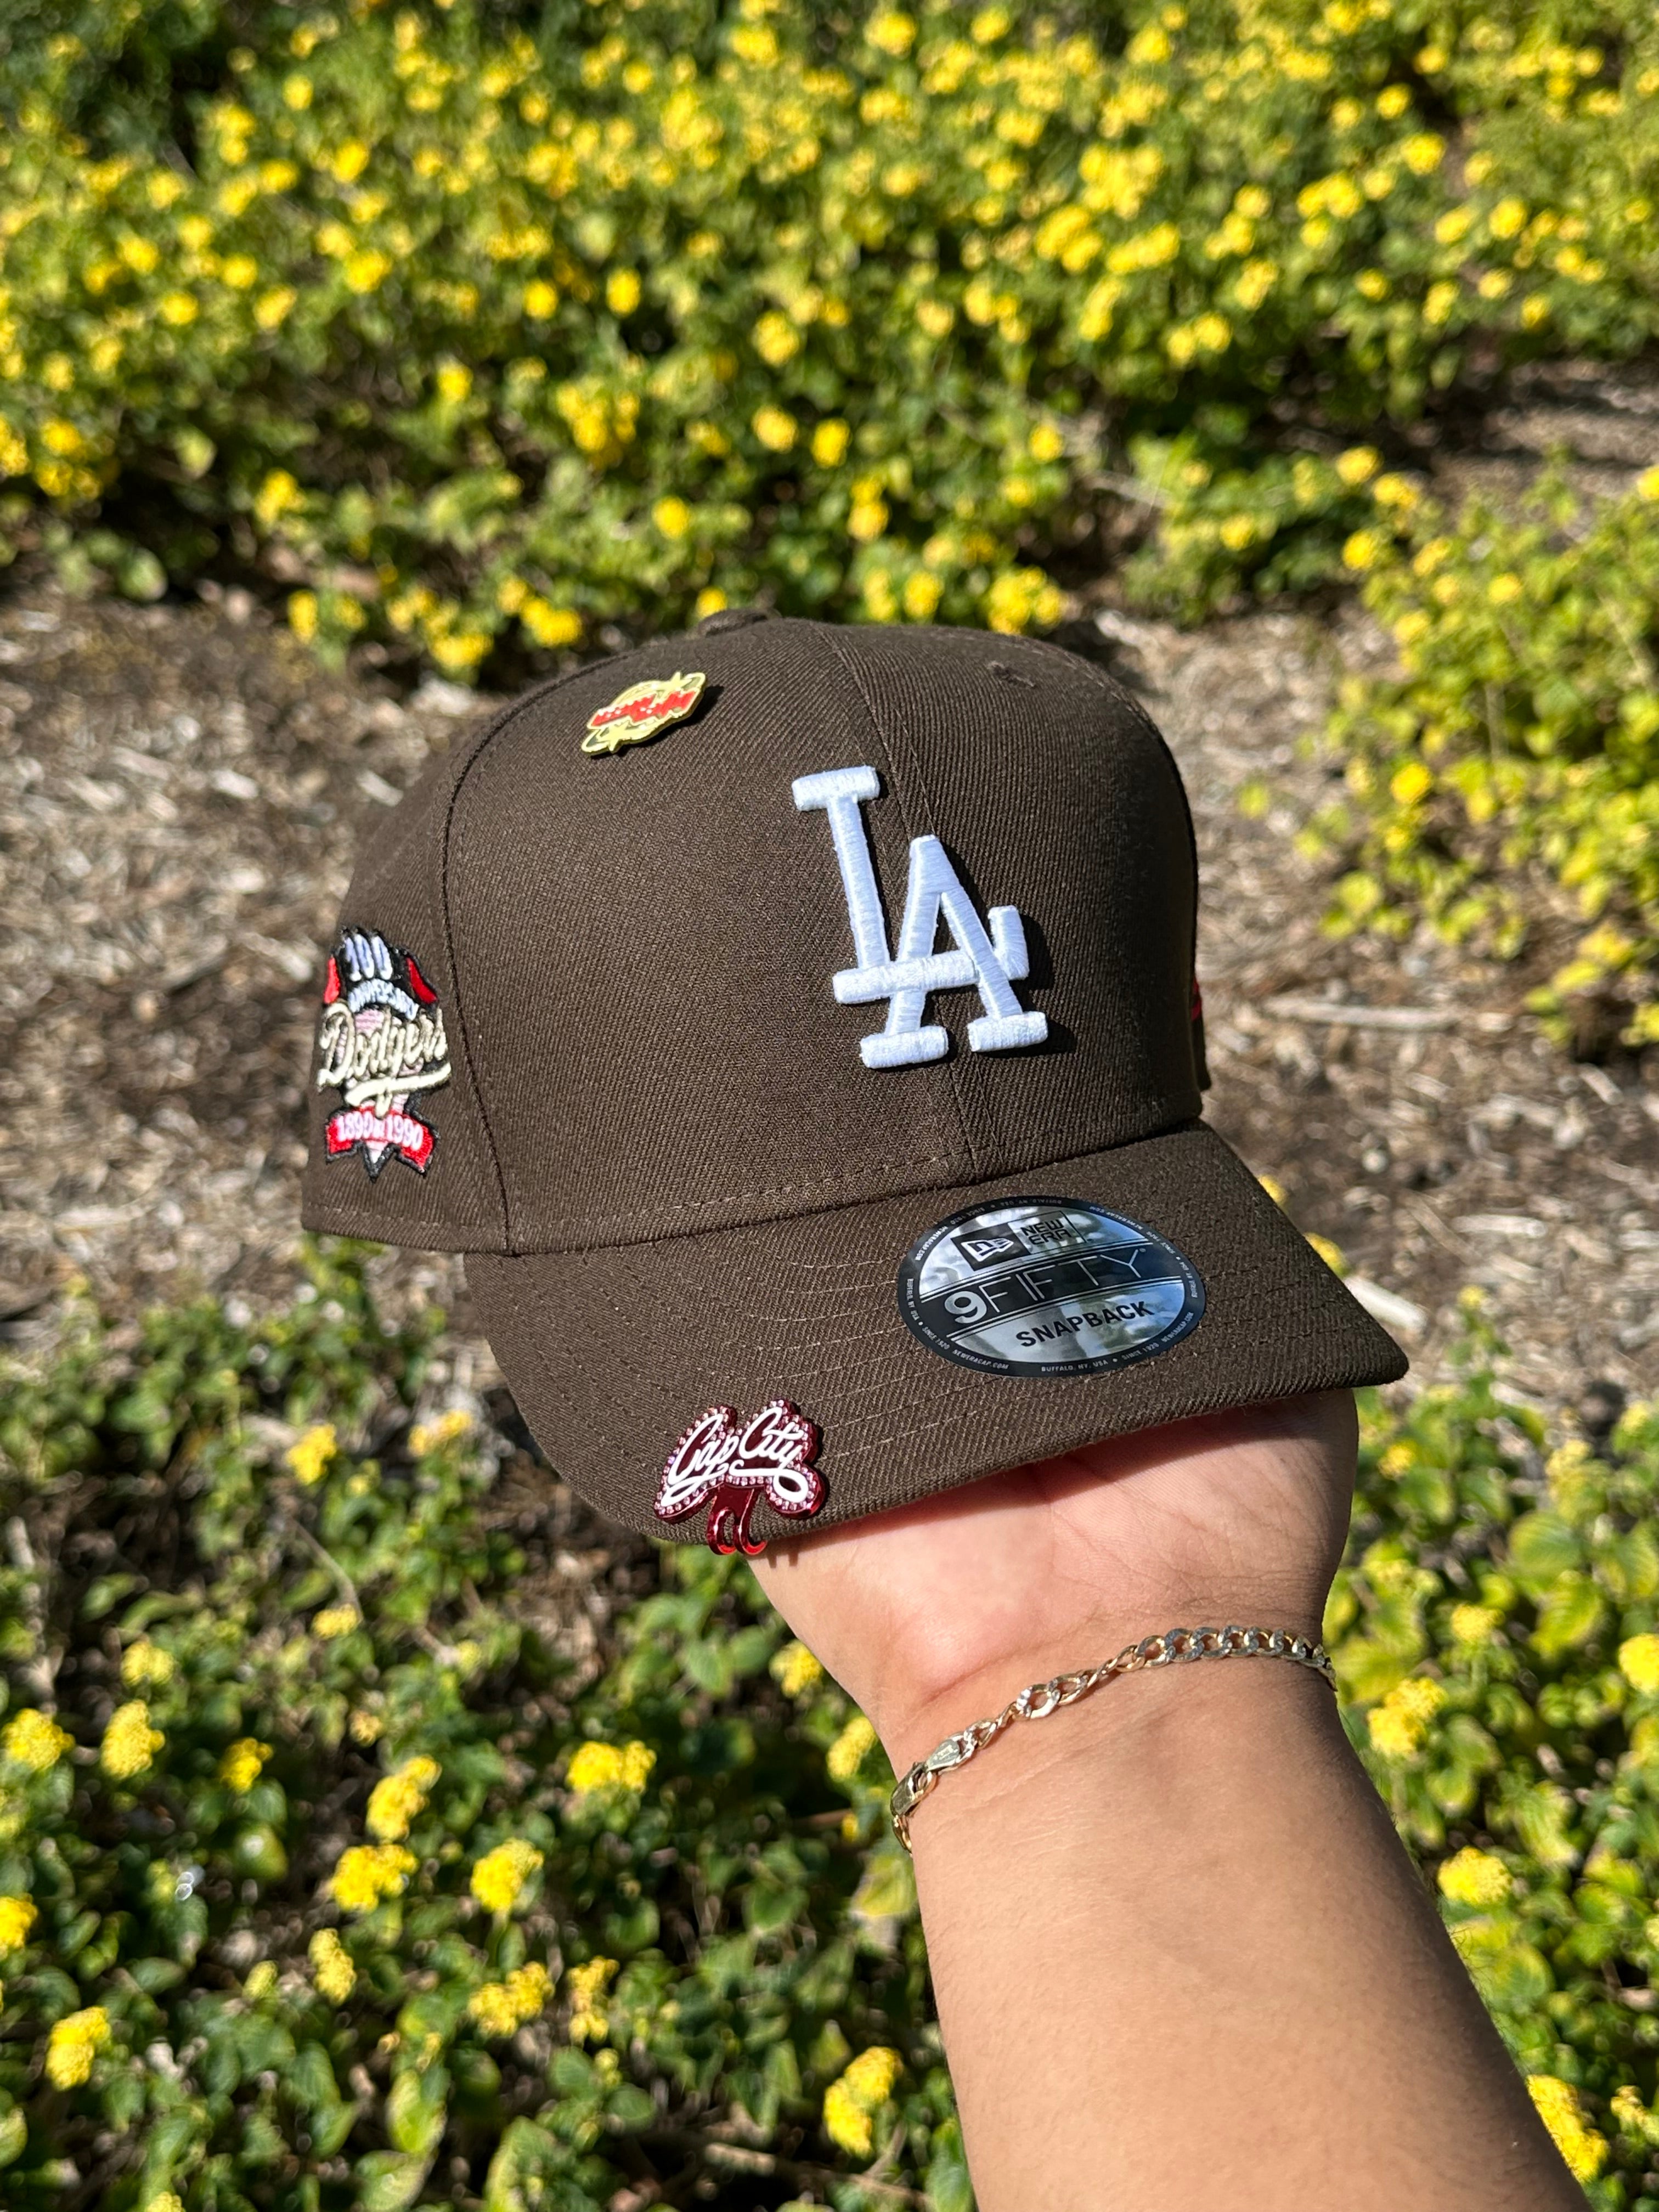 NEW ERA EXCLUSIVE 9FIFTY WALNUT BROWN LOS ANGELES DODGERS SNAPBACK W/ 100TH ANNIVERSARY PATCH